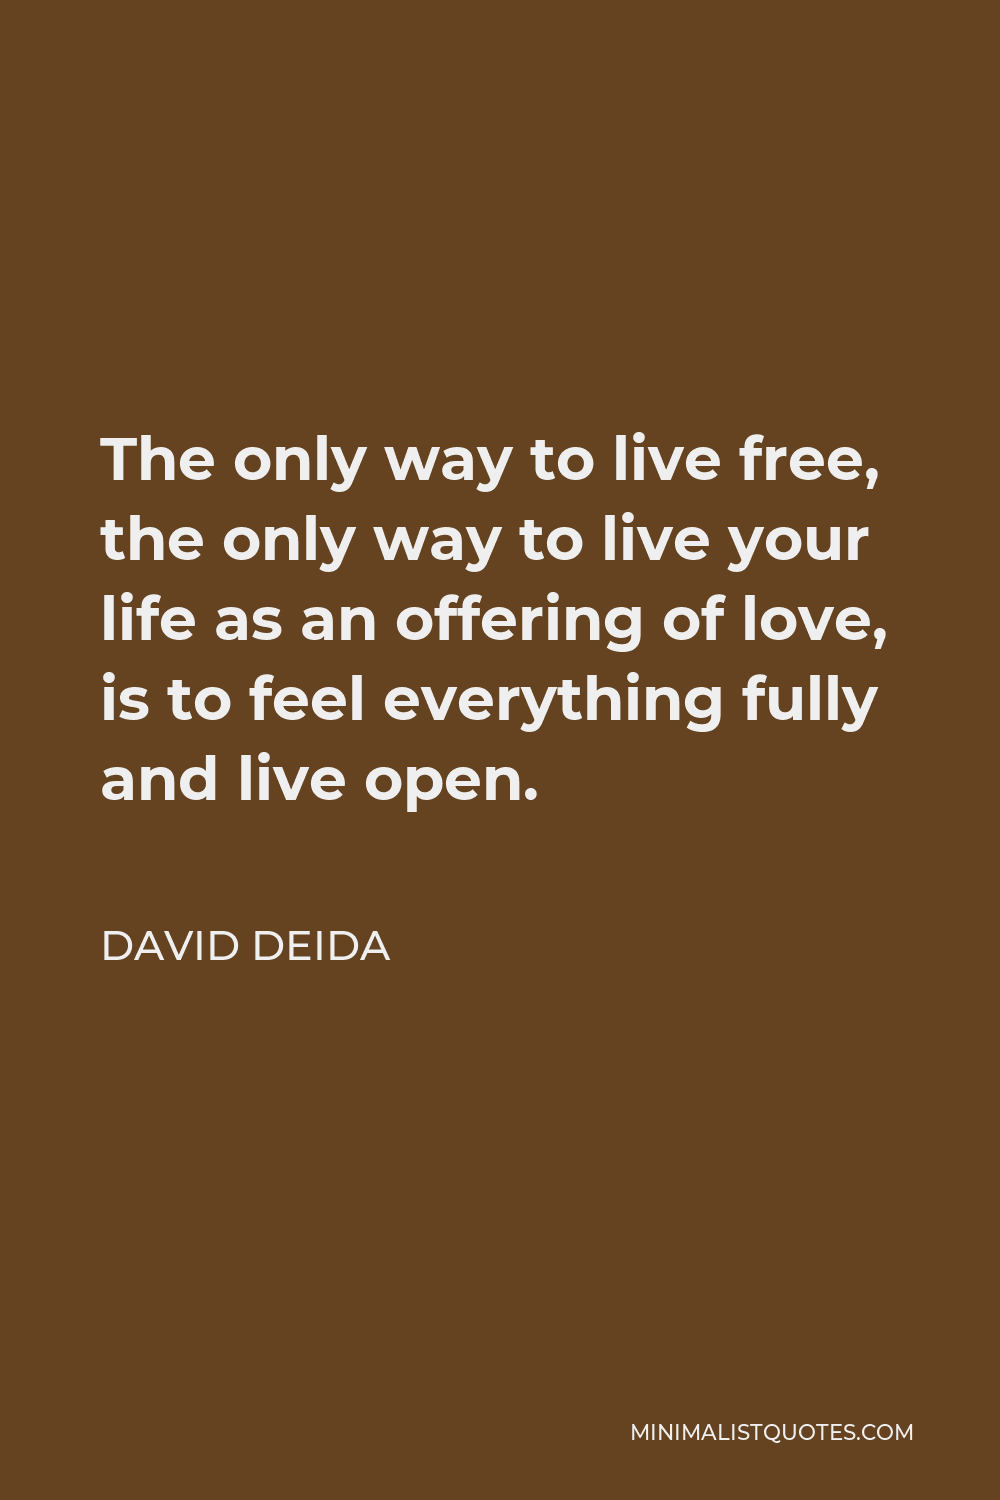 David Deida Quote - The only way to live free, the only way to live your life as an offering of love, is to feel everything fully and live open.